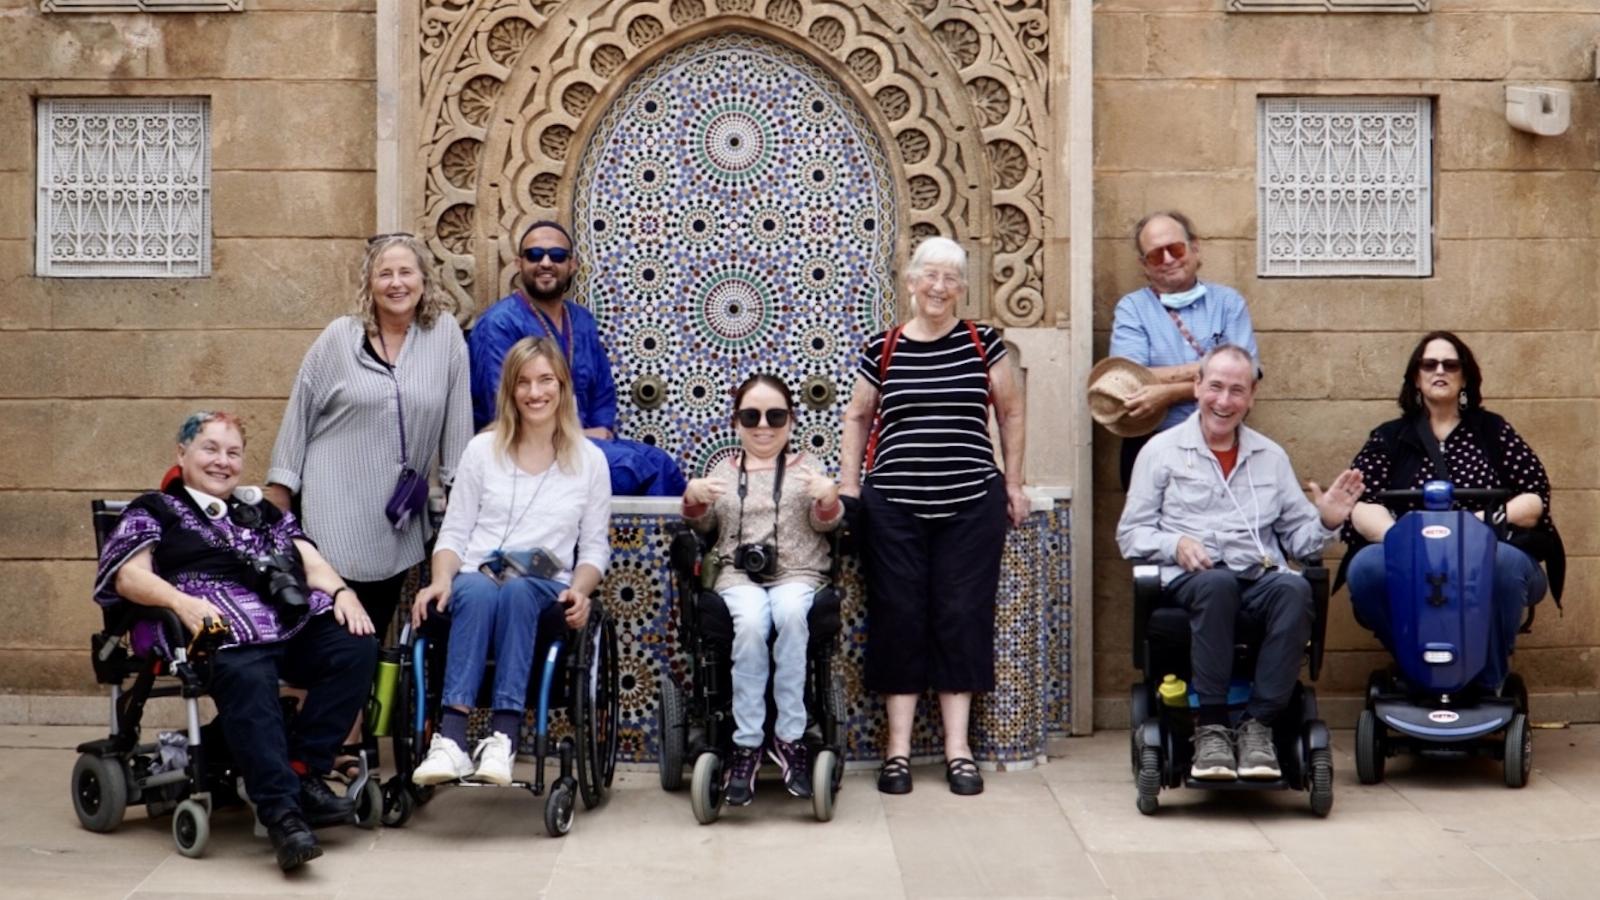 Wheel the World grabs $6M to offer guaranteed accessibility, price match for hotel rooms